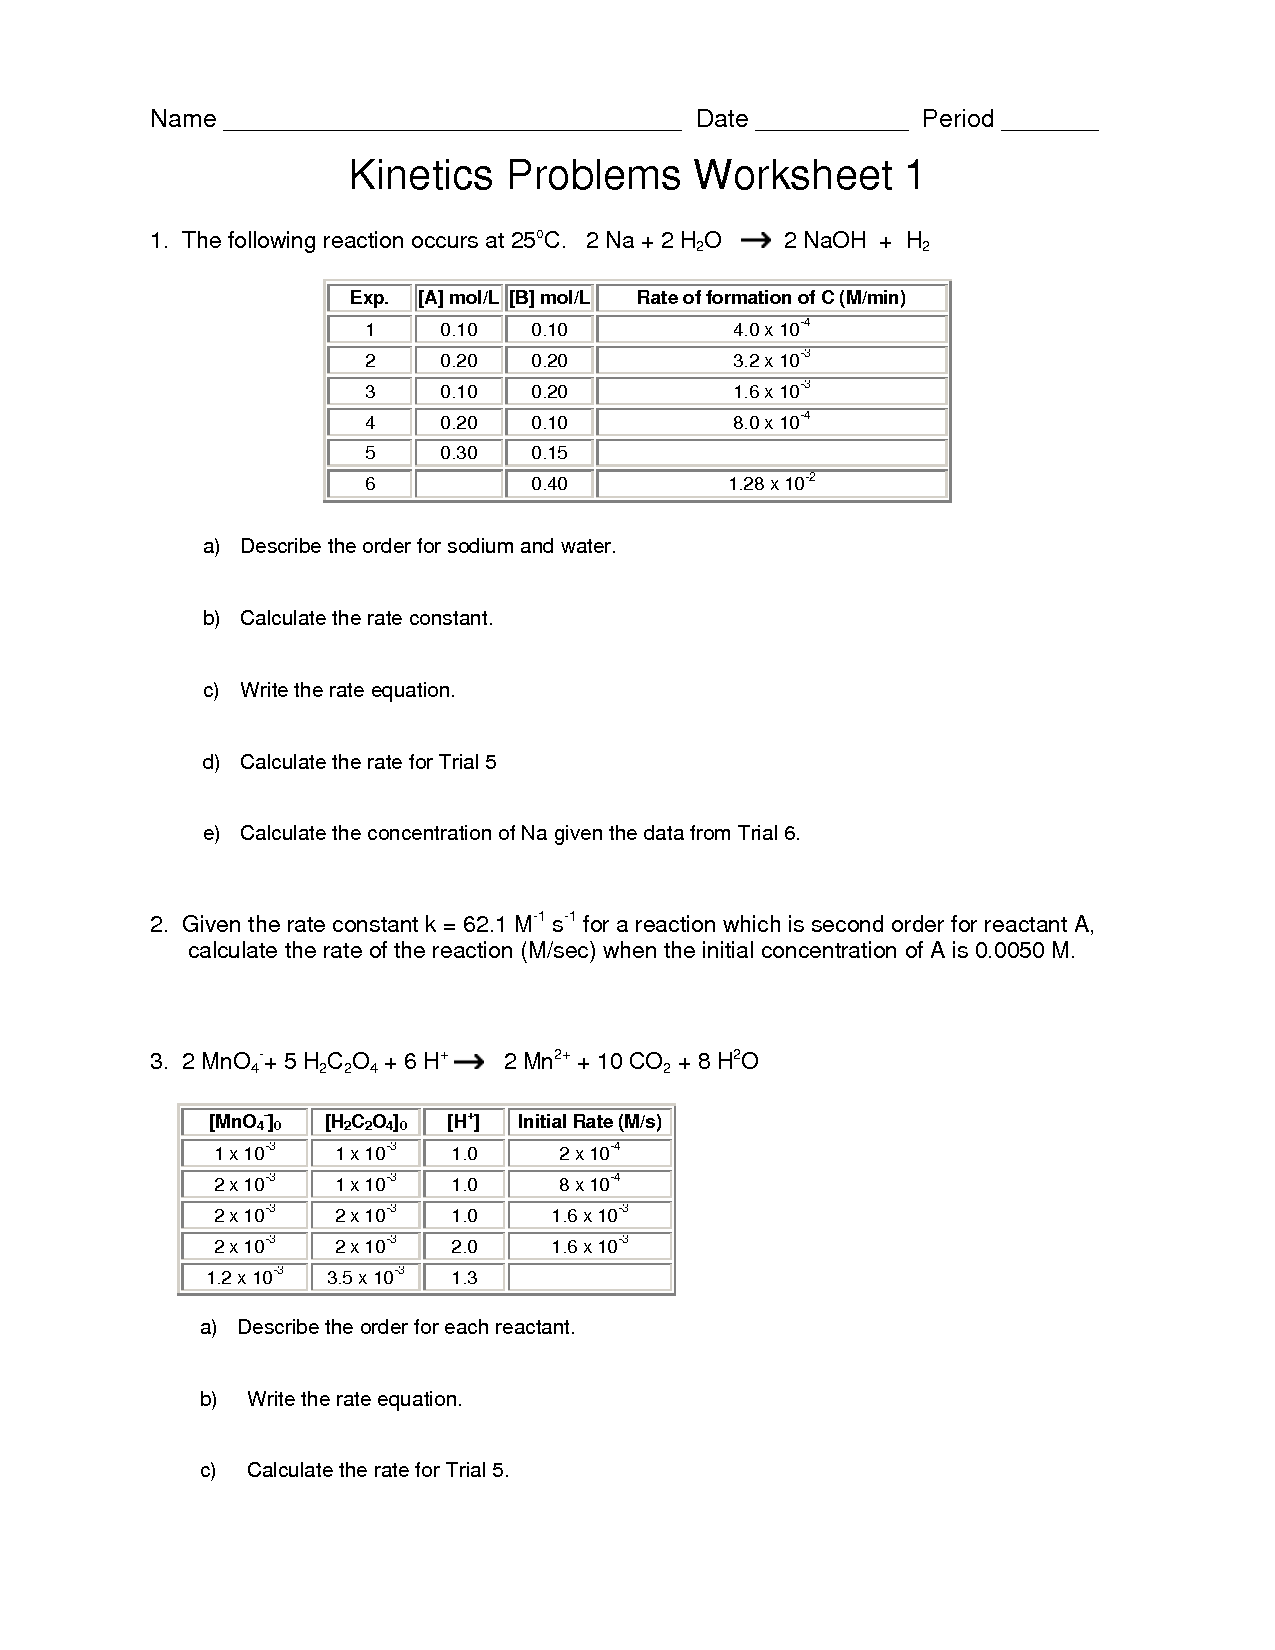 14-best-images-of-enzymes-worksheet-answer-key-enzymes-worksheet-review-answer-key-virtual